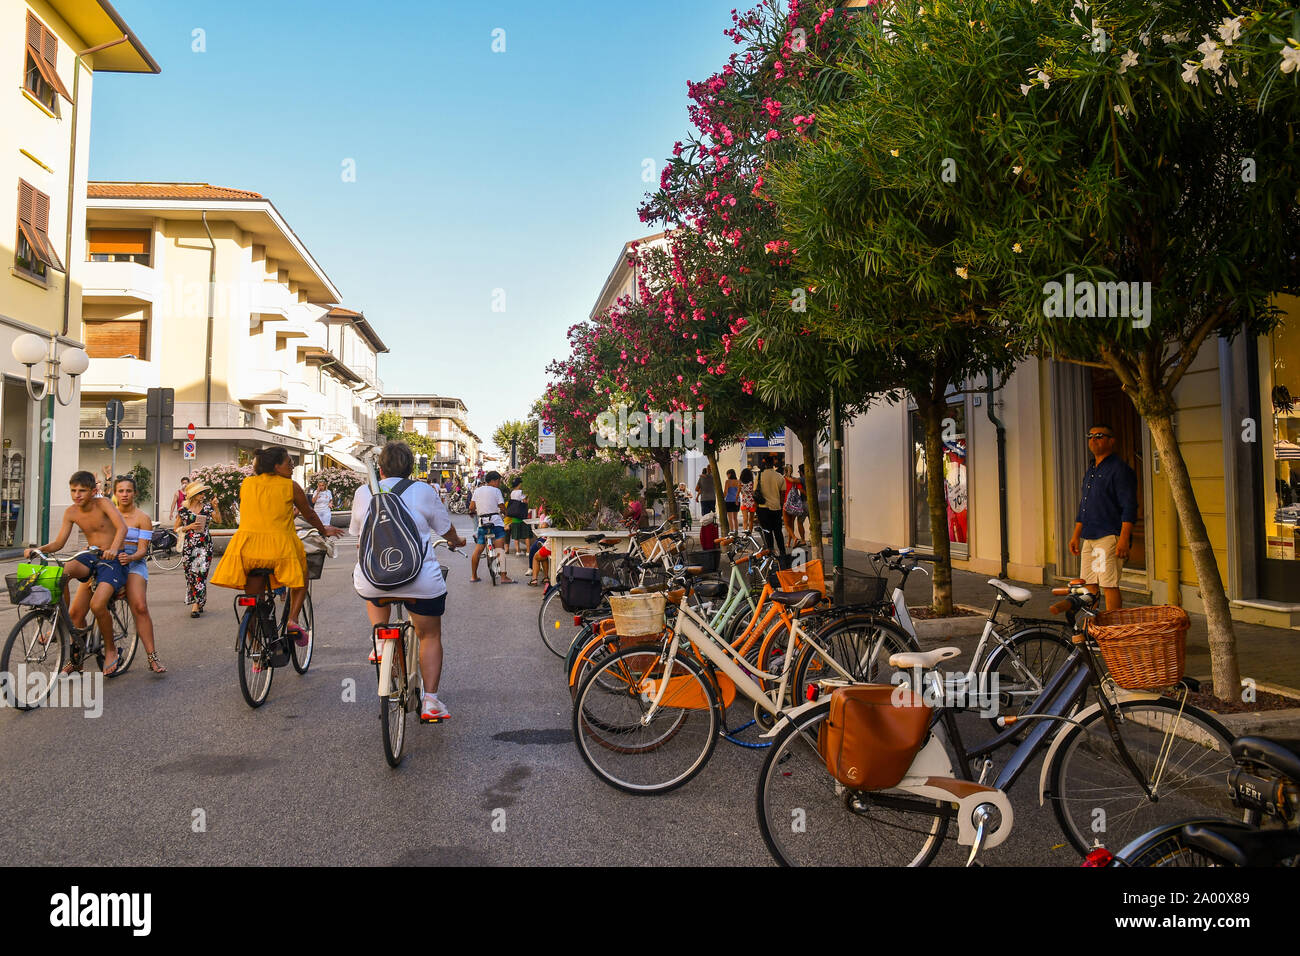 Street view of the sea city of Forte dei Marmi with people on bicycles, parked cycles and flowering oleander trees in summer, Lucca, Versilia, Italy Stock Photo